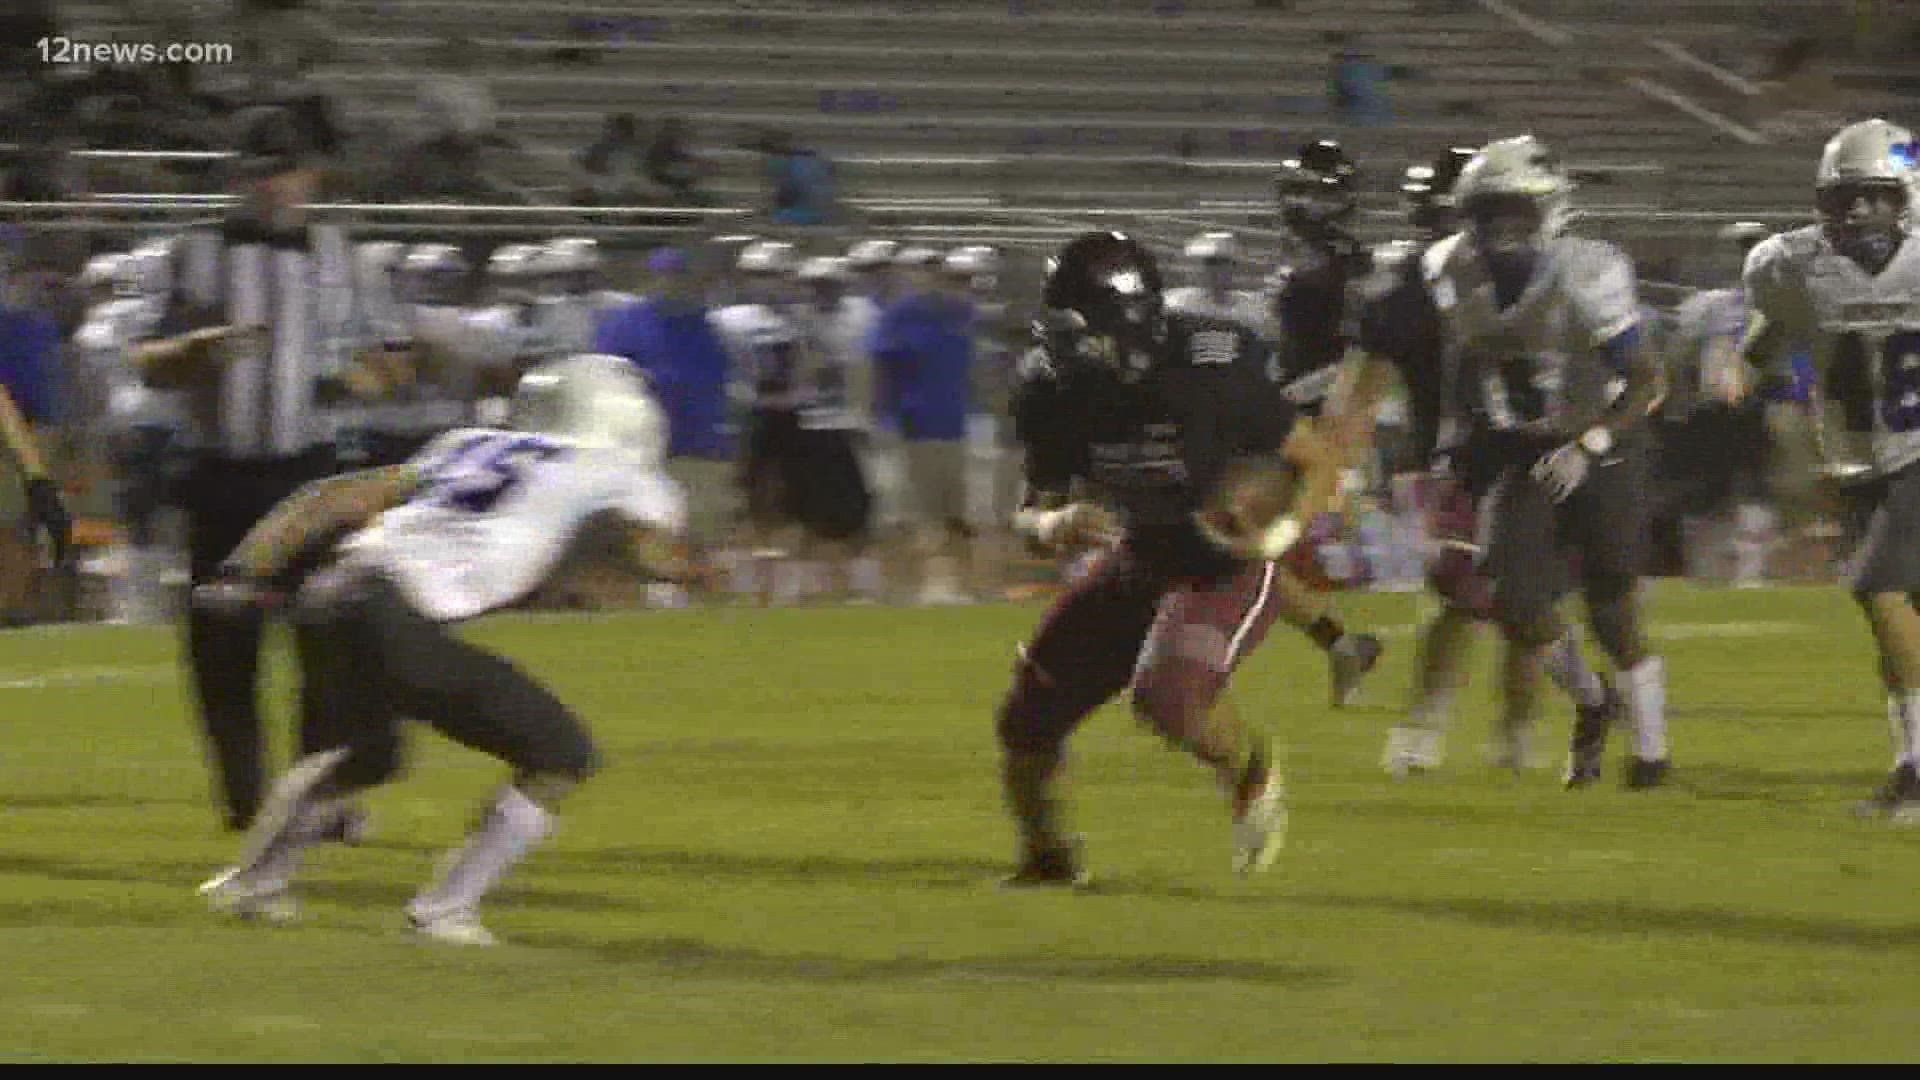 Desert Ridge put on a show for their homecoming game and defeat Dobson, 49-0.